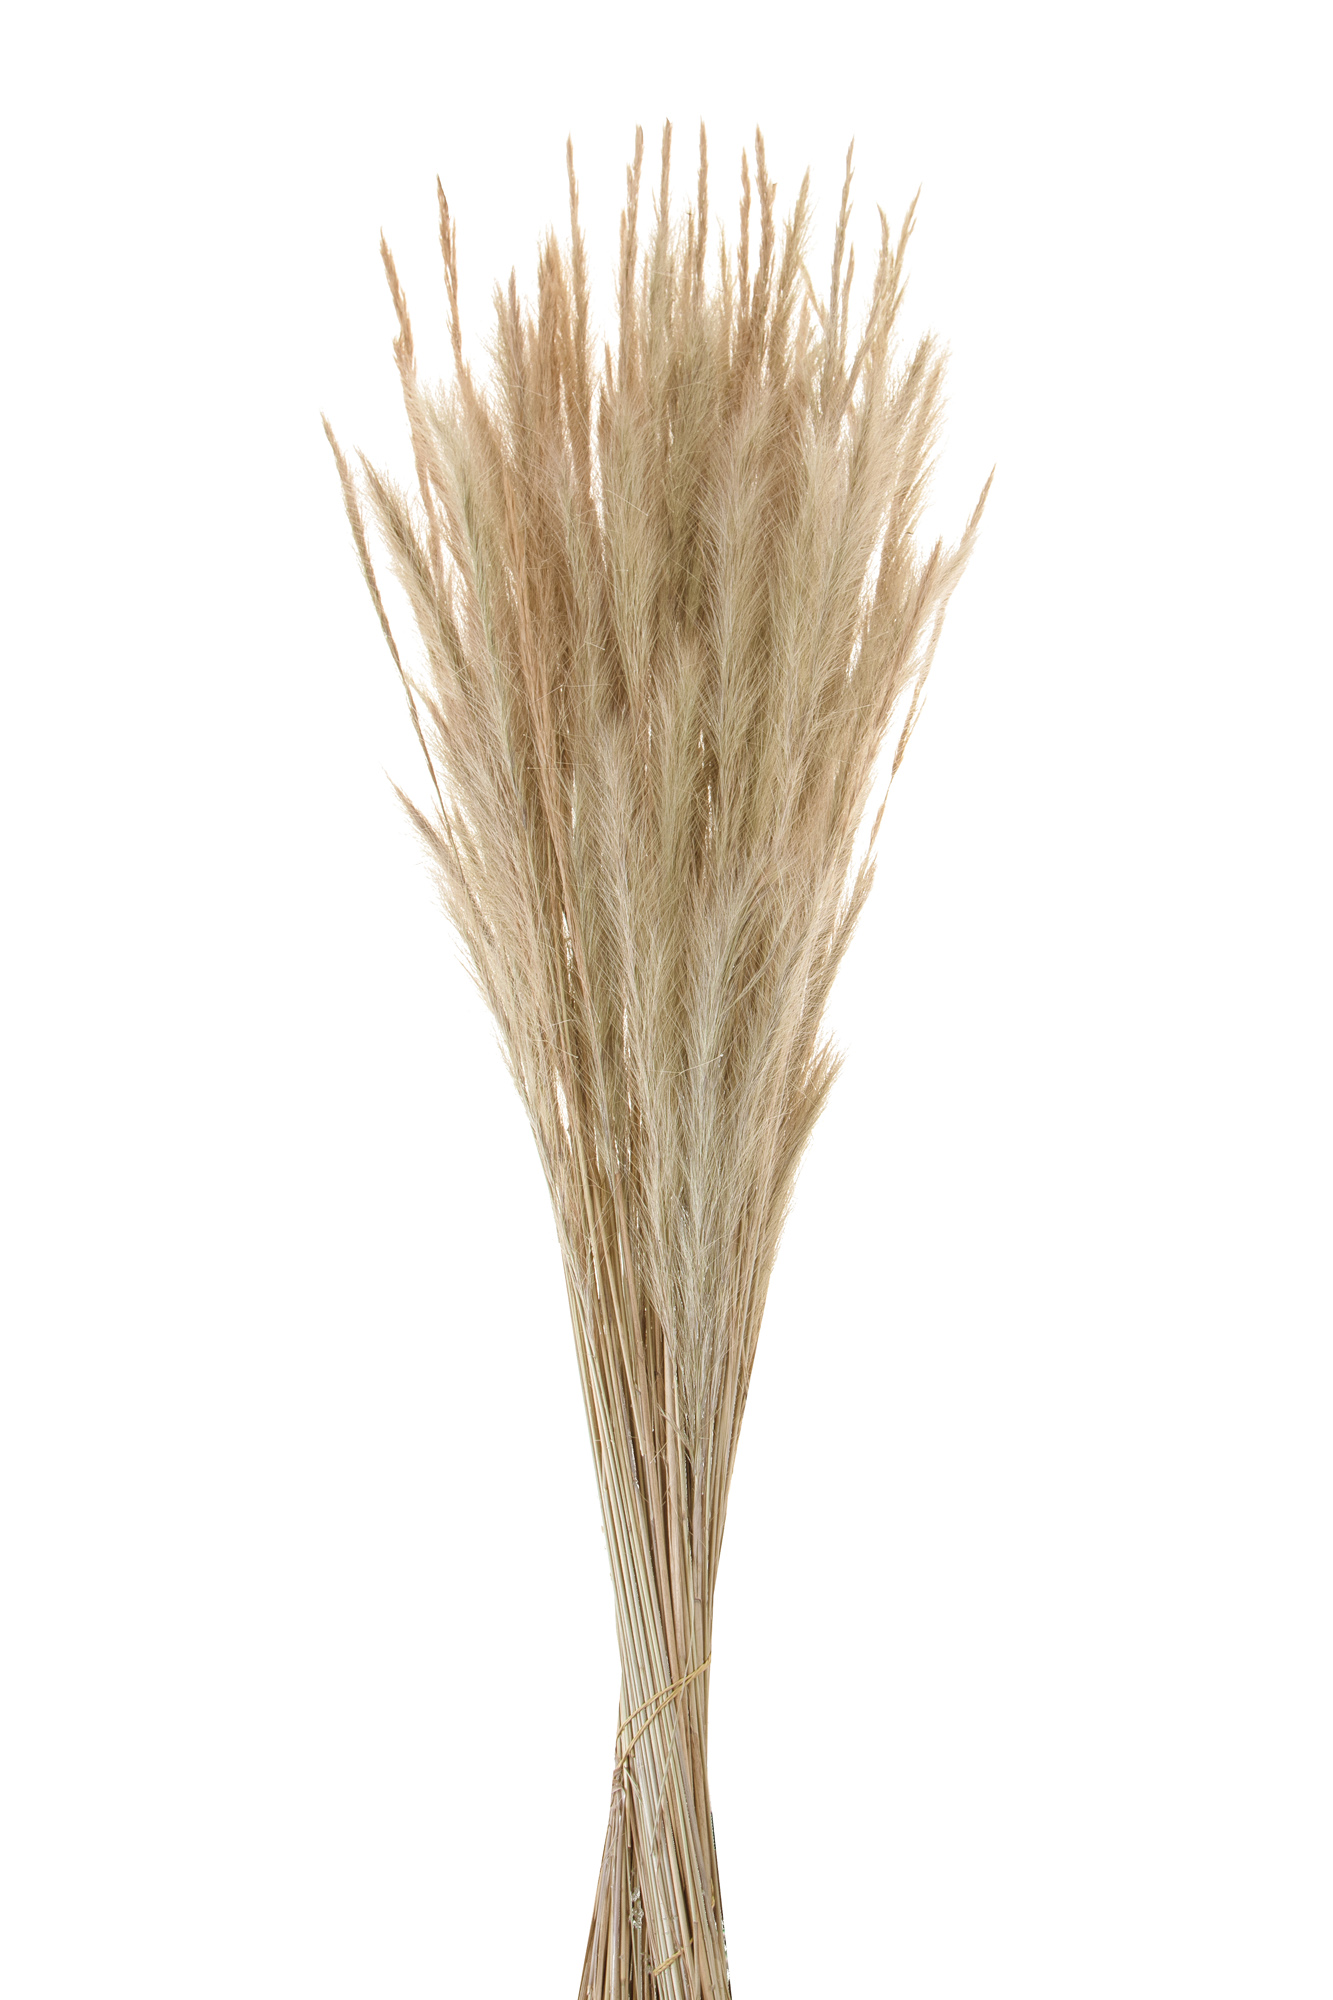 NATURAL PRODUCTS DRIED FLOWERS AND ERBS,FLOWERS, FRUITS AND NATURAL PROTEES,ERBA VOLPE 105 CM C.A. MZ SACCO